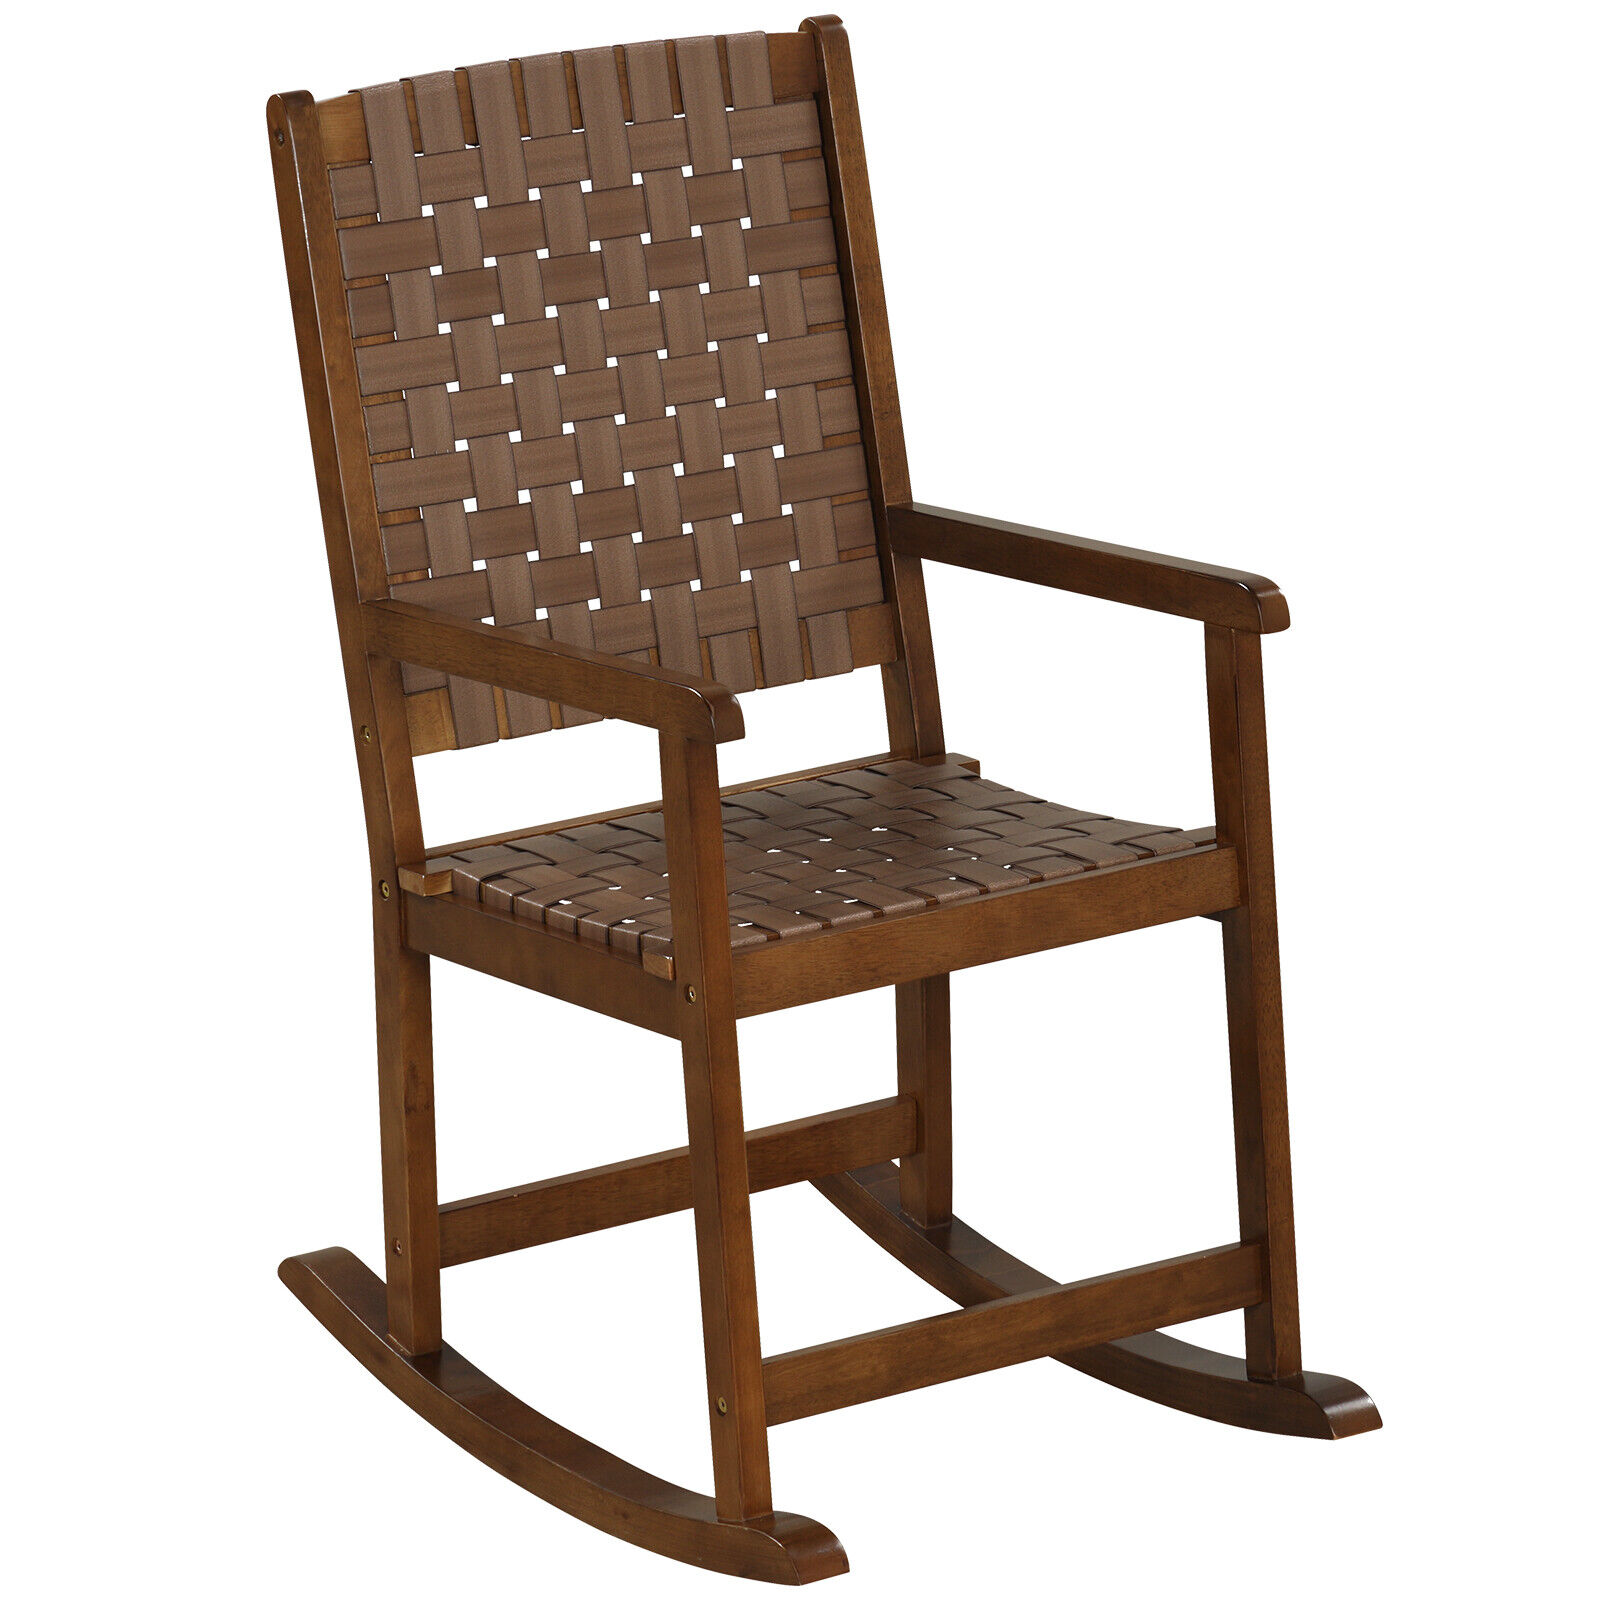 Great Choice Products Wood Rocking Chair Indoor Outdoor Rocking Chair W/ Pu Seat & Rubber Wood Frame